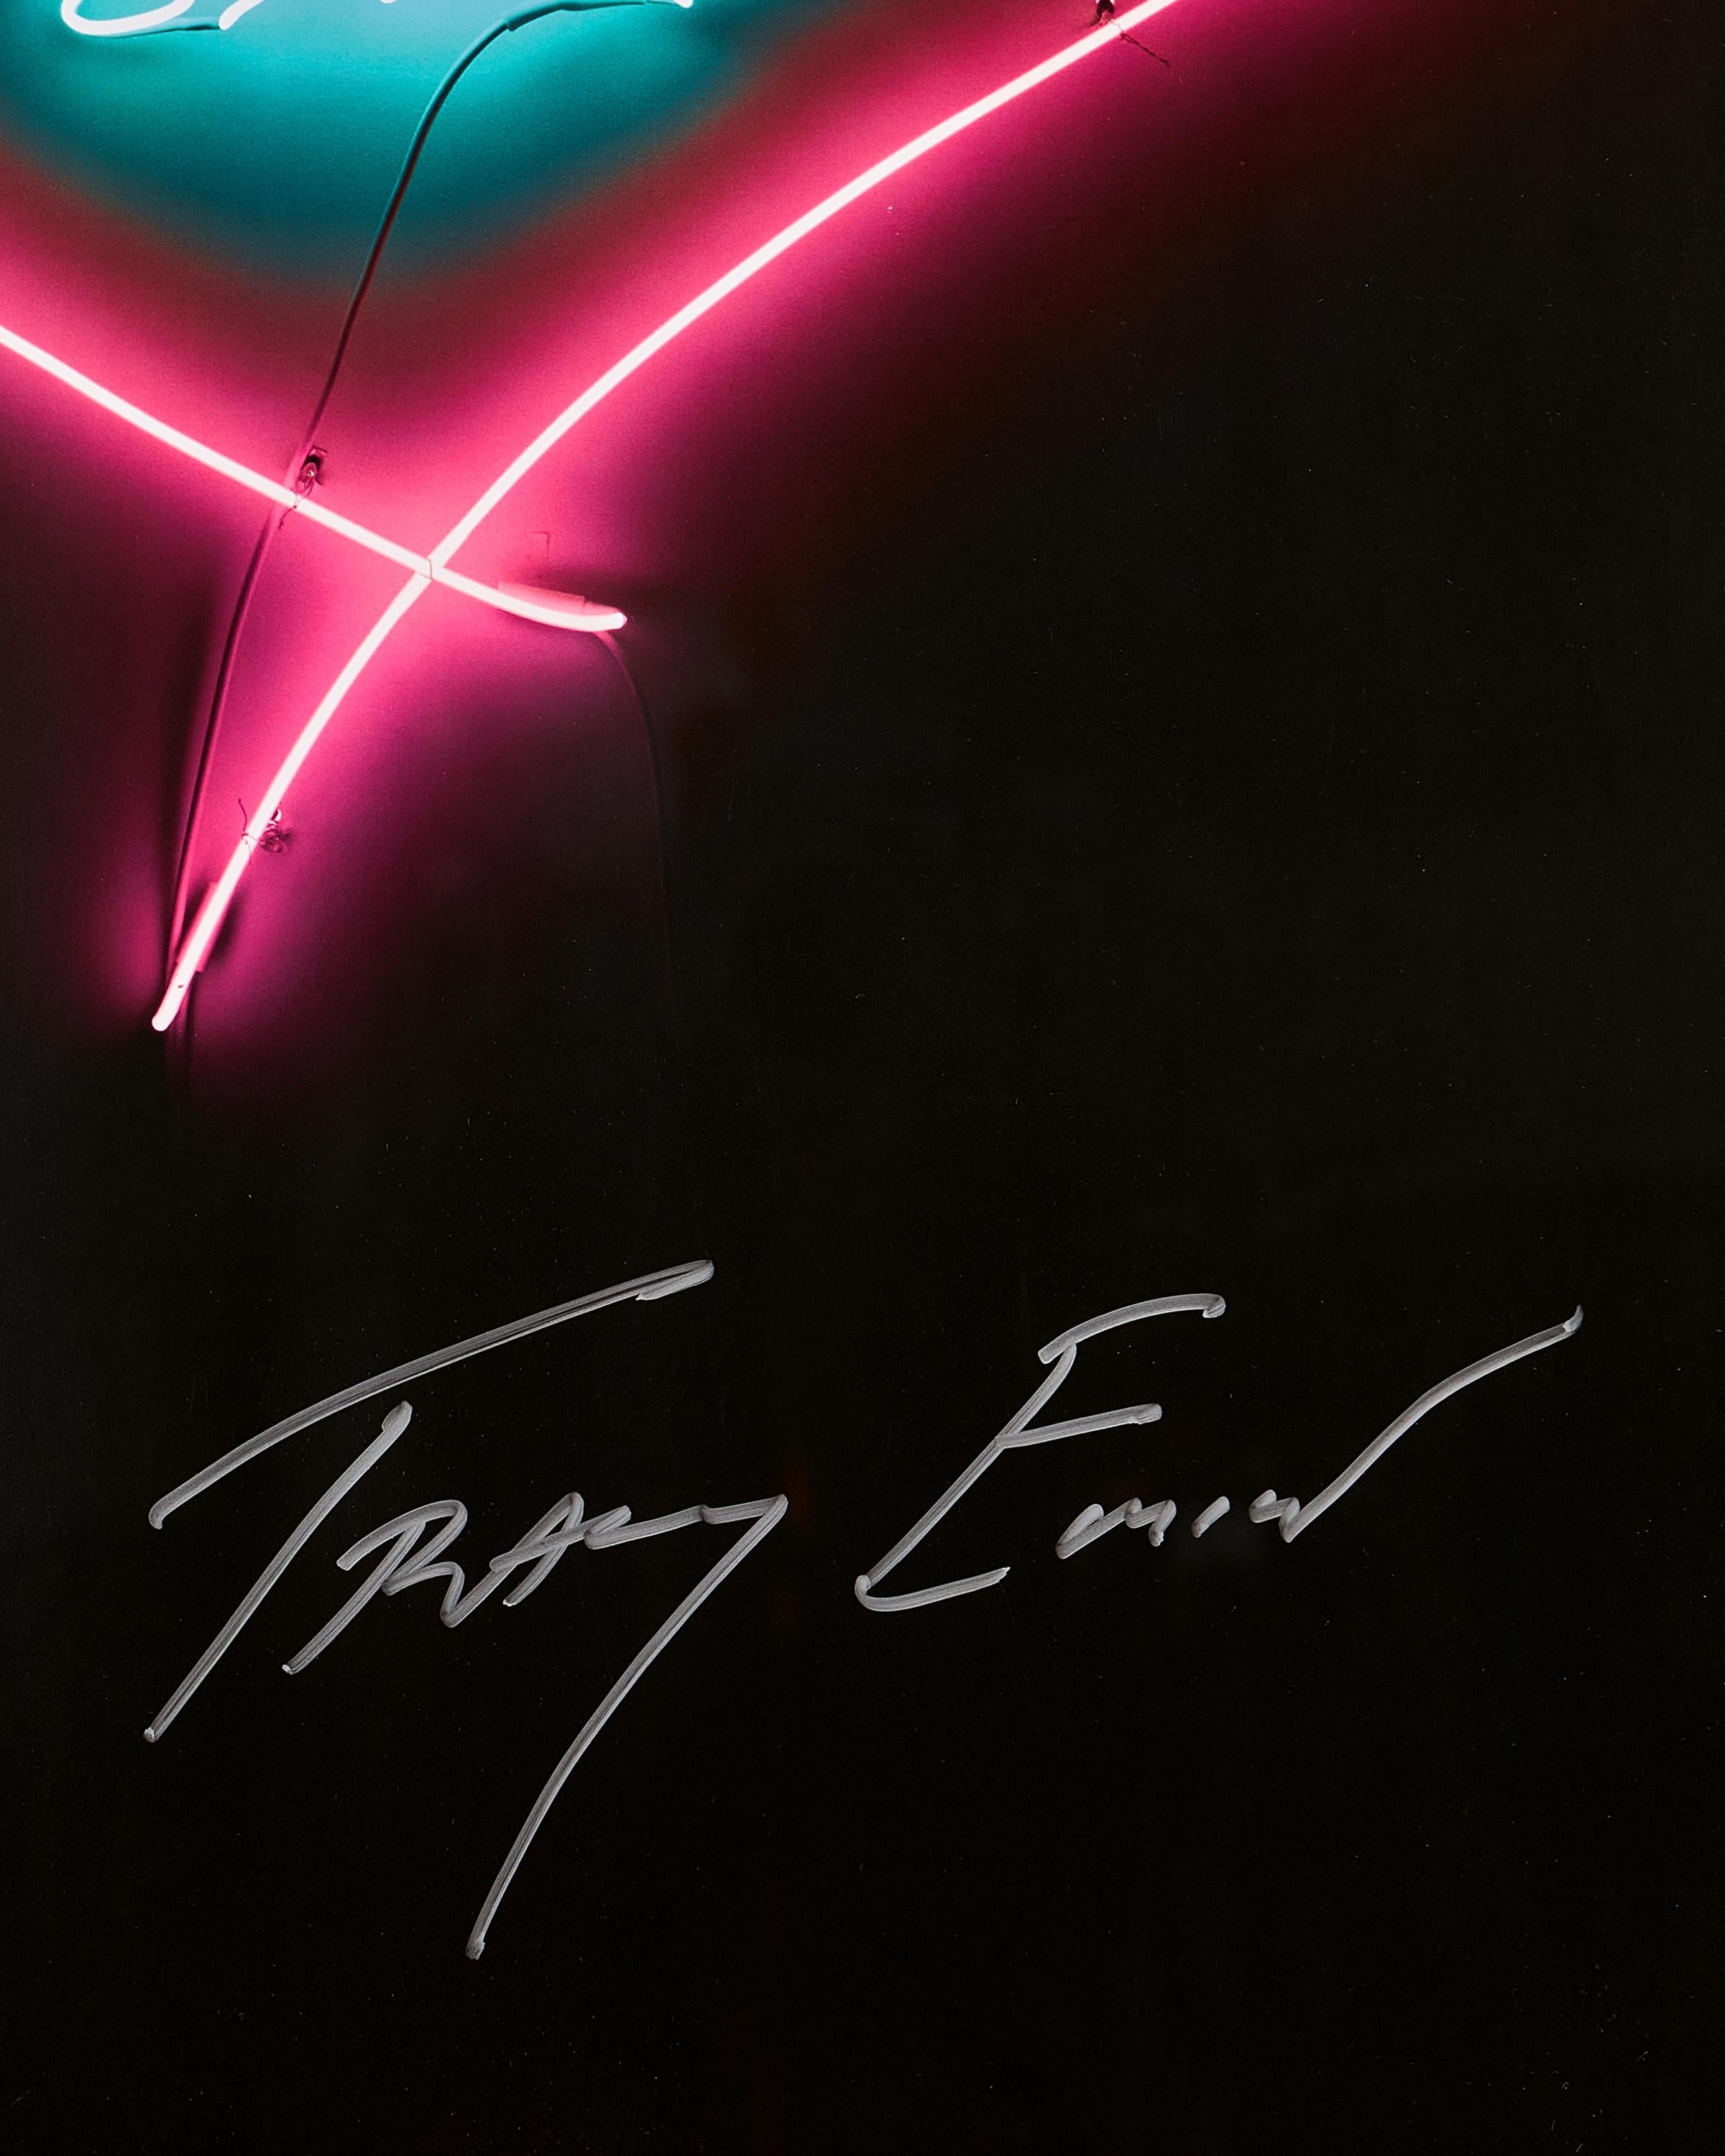 Tracy Emin (British, b.1963) You Loved Me Like A Distant Star
An offset lithograph printed in colors, 2015, signed in silver pen, from the edition of 500 published by Emin International, on glossy wove paper, the full sheet printed to the edges,